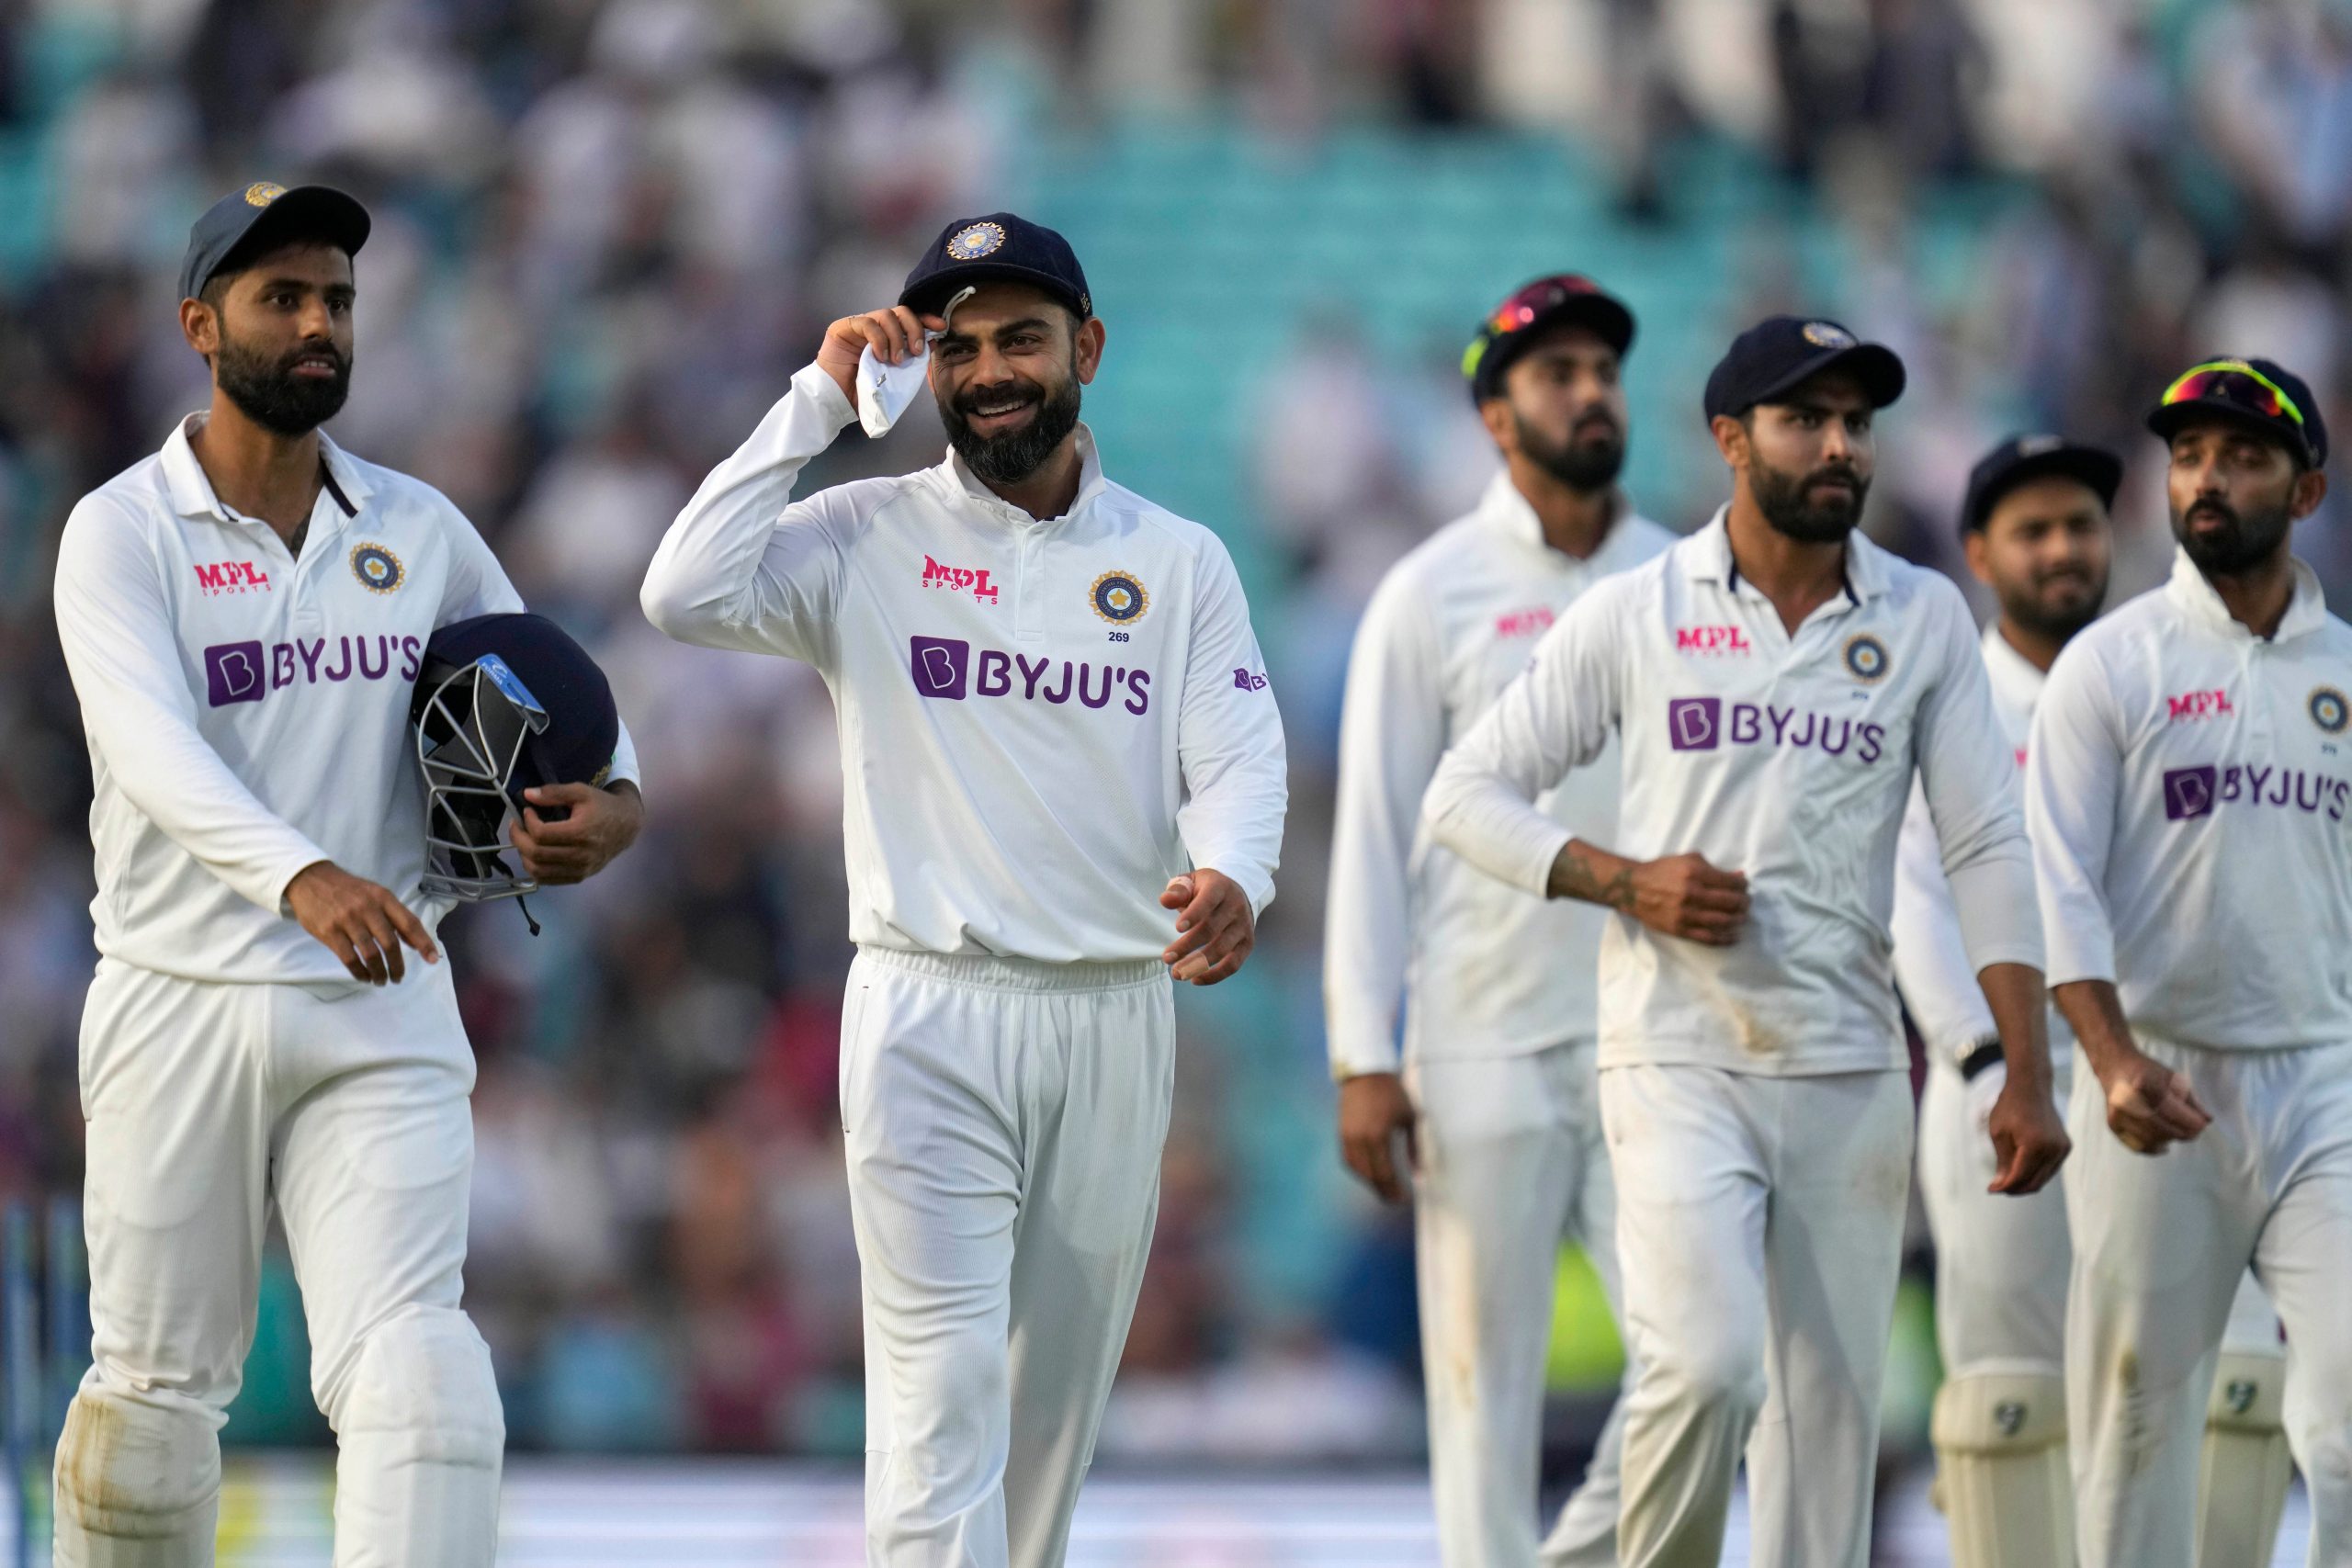 India vs England 4th Test: 5 things to watch out for on Day 5